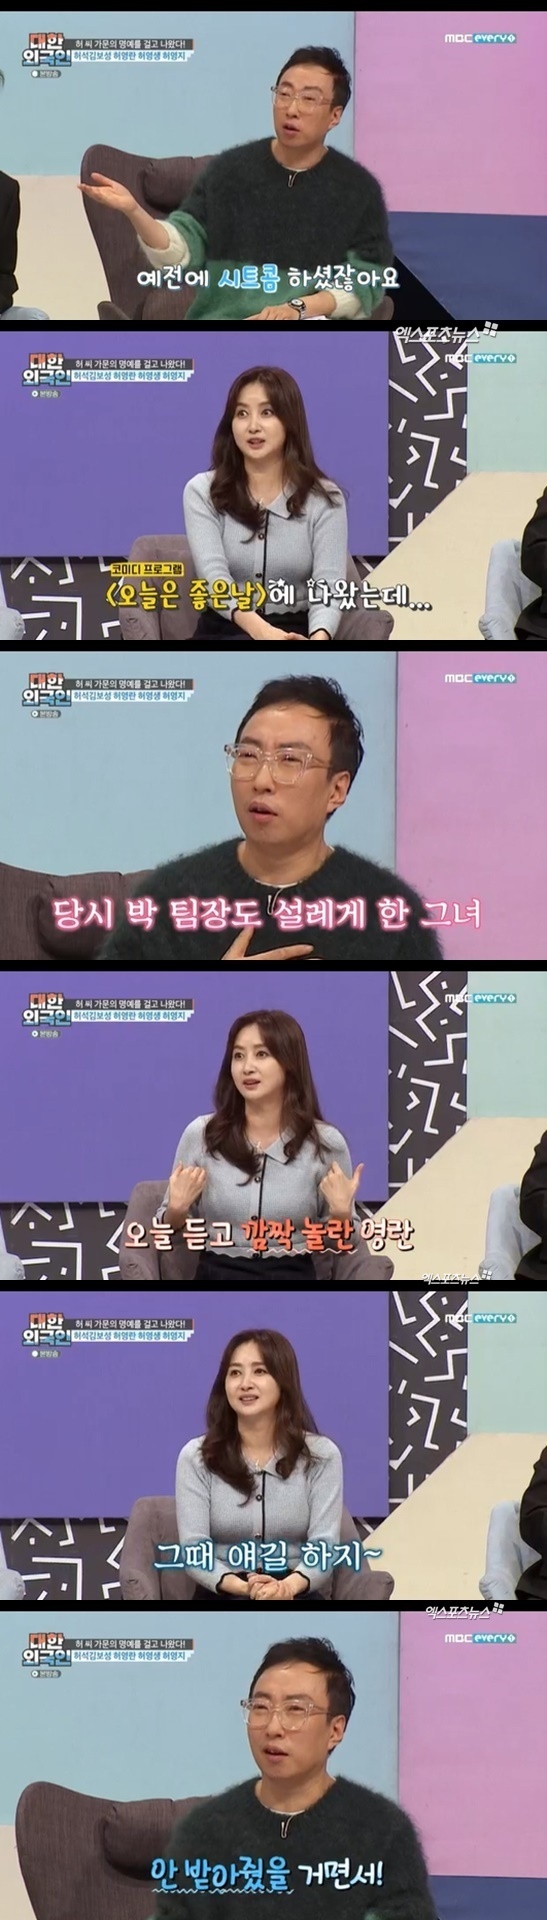 MBC Every One South Korean Foreigners, which was broadcast on the 15th, was featured in The Permission Family featuring the entertainment industry representative Huh Seok Kim Bo-sung, Heo Yeong-ran, Heo Young and KARA Heo Young.Park Myeong-su said, Heo Yeong-ran did not sitcom before, but it was also on the comedy program Today is a good day, and all the comedians liked it.Park Myeong-su is a little bit trembling. I liked it a long time ago, Kim said.Heo Yeong-ran said, I really didnt know, I was surprised to come out of nowhere and like it in the old days, Ill talk about it then.Park Myeong-su said, I did not just like it, but all the male comedians liked it.Heo Young is not able to speak when he meets him. Photo: MBC Every One Broadcasting Screen